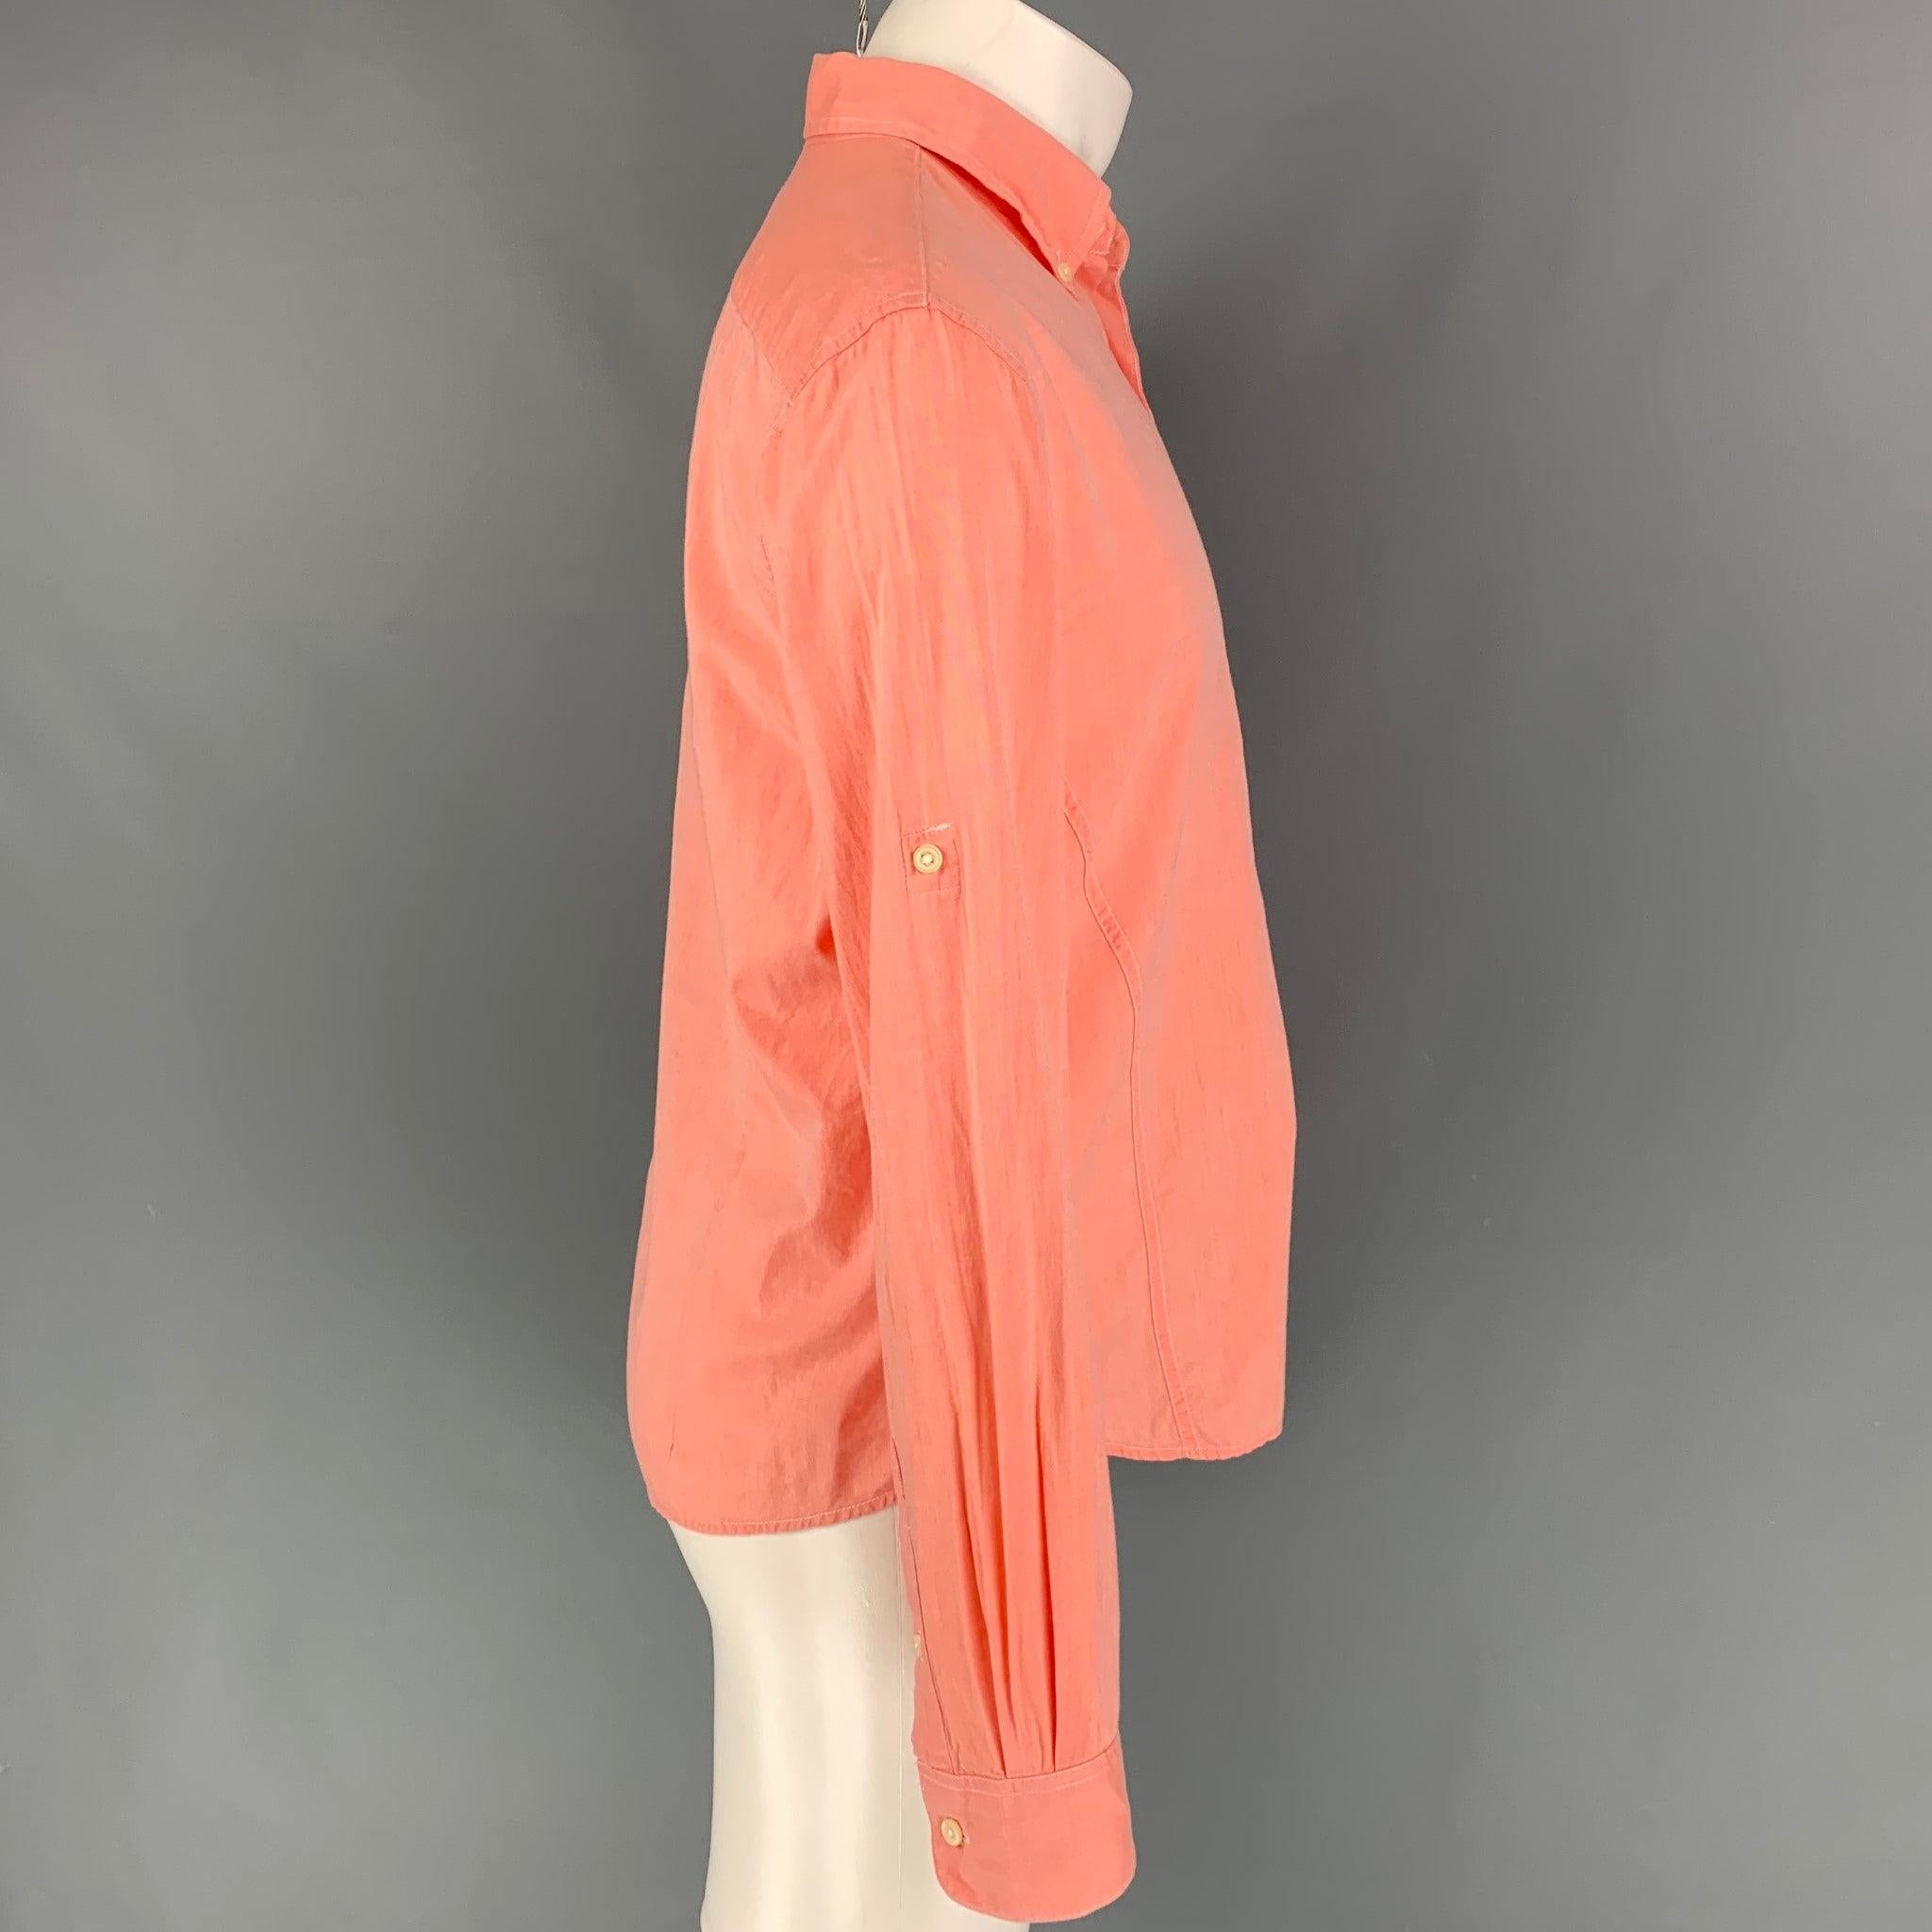 JOHN VARVATOS long sleeve shirt comes in a salmon material featuring a button down collar, front pocket, and a button up closure.
Very Good
Pre-Owned Condition. 

Marked:   M  

Measurements: 
 
Shoulder: 18.5 inches  Chest: 42 inches  Sleeve: 26